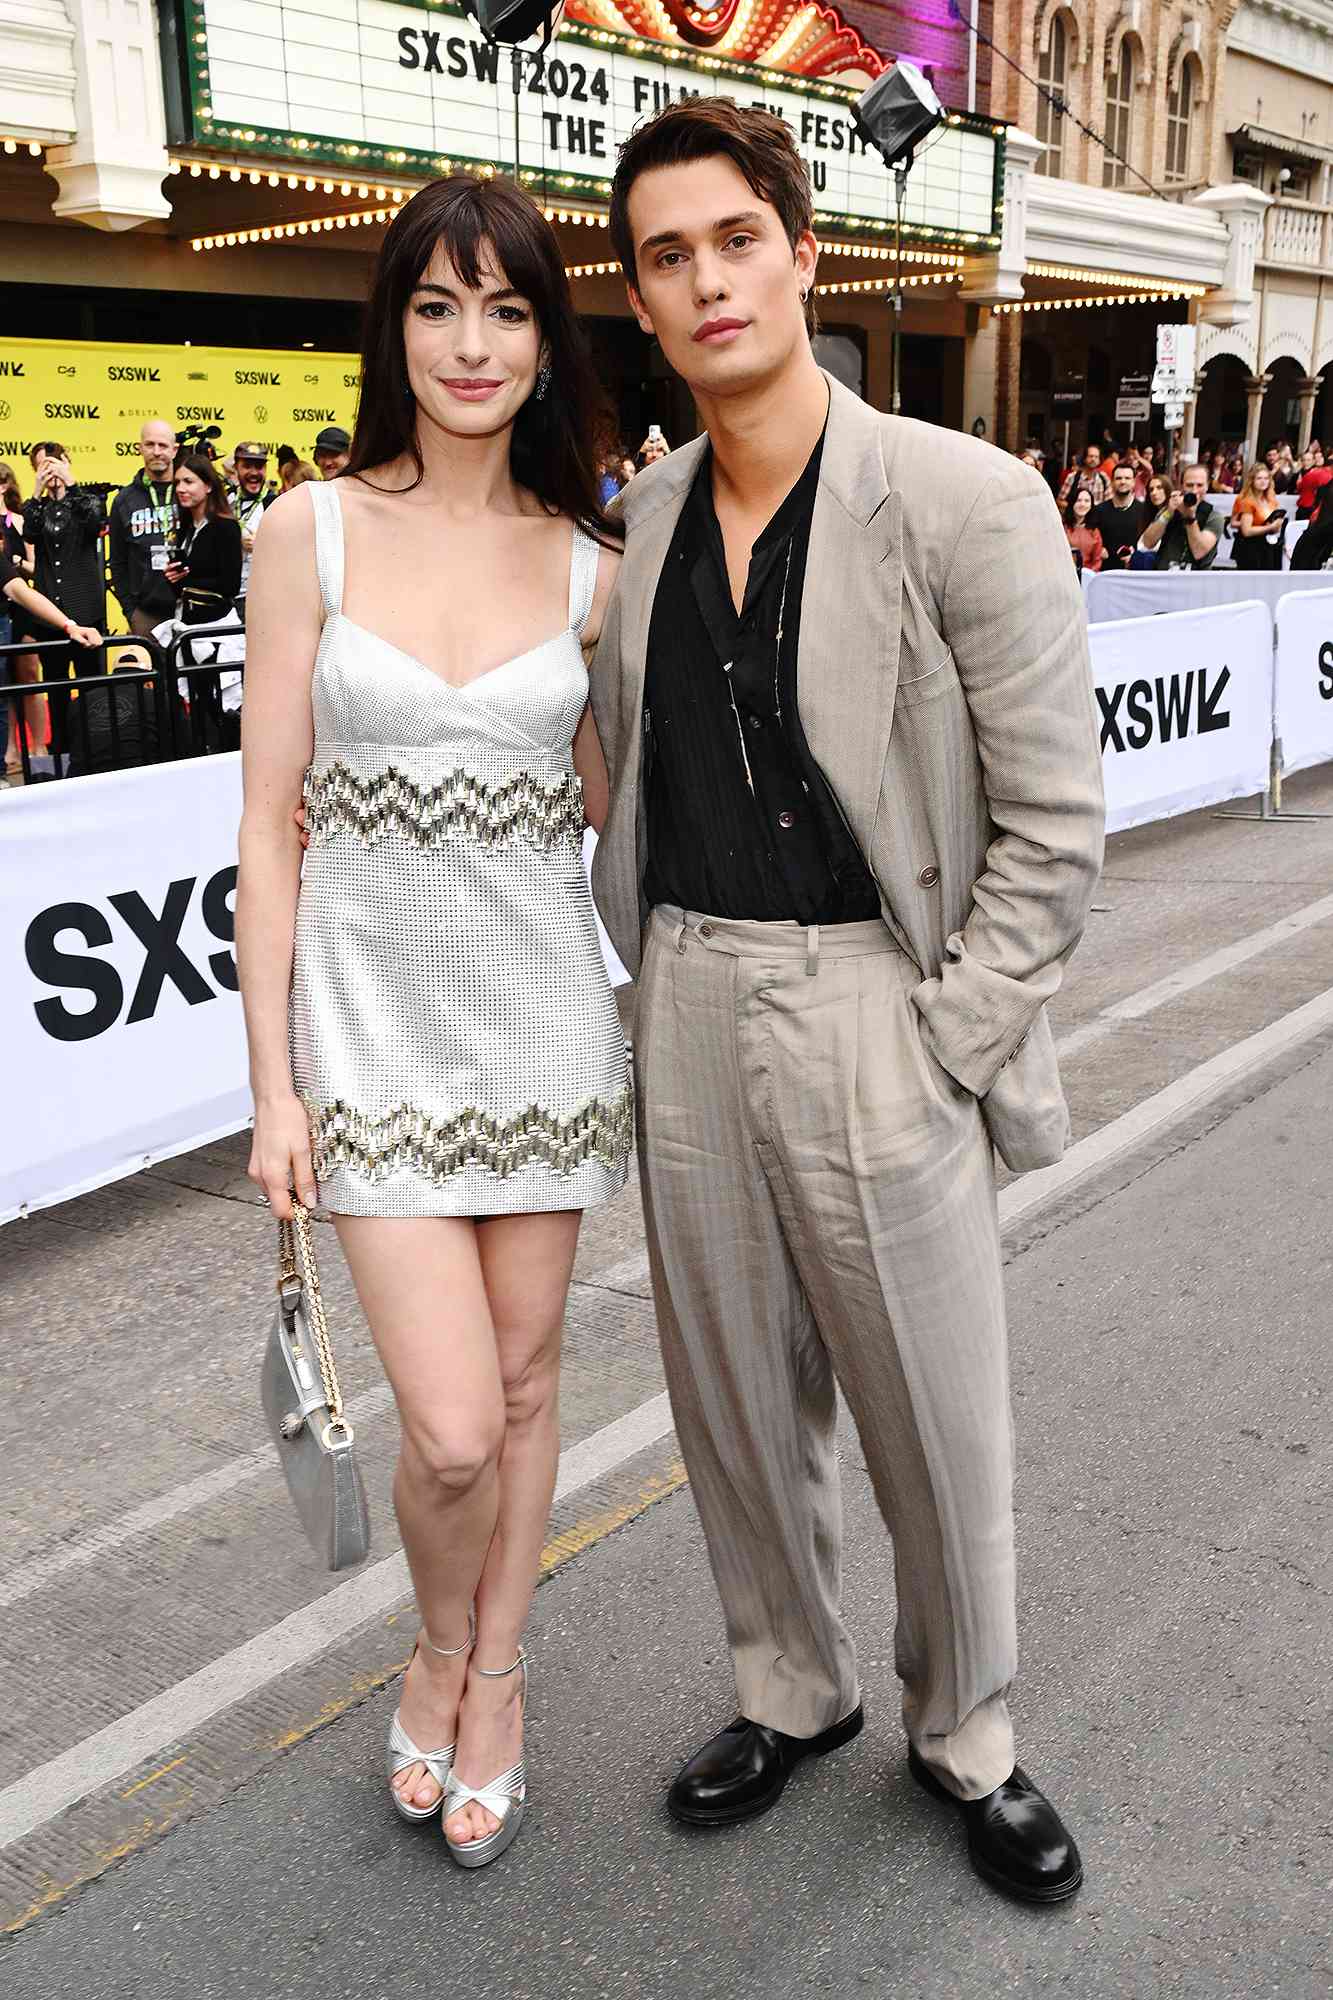 Anne Hathaway and Nicholas Galitzine attend "The Idea Of You" World Premiere during SXSW at The Paramount Theater on March 16, 2024 in Austin, Texas